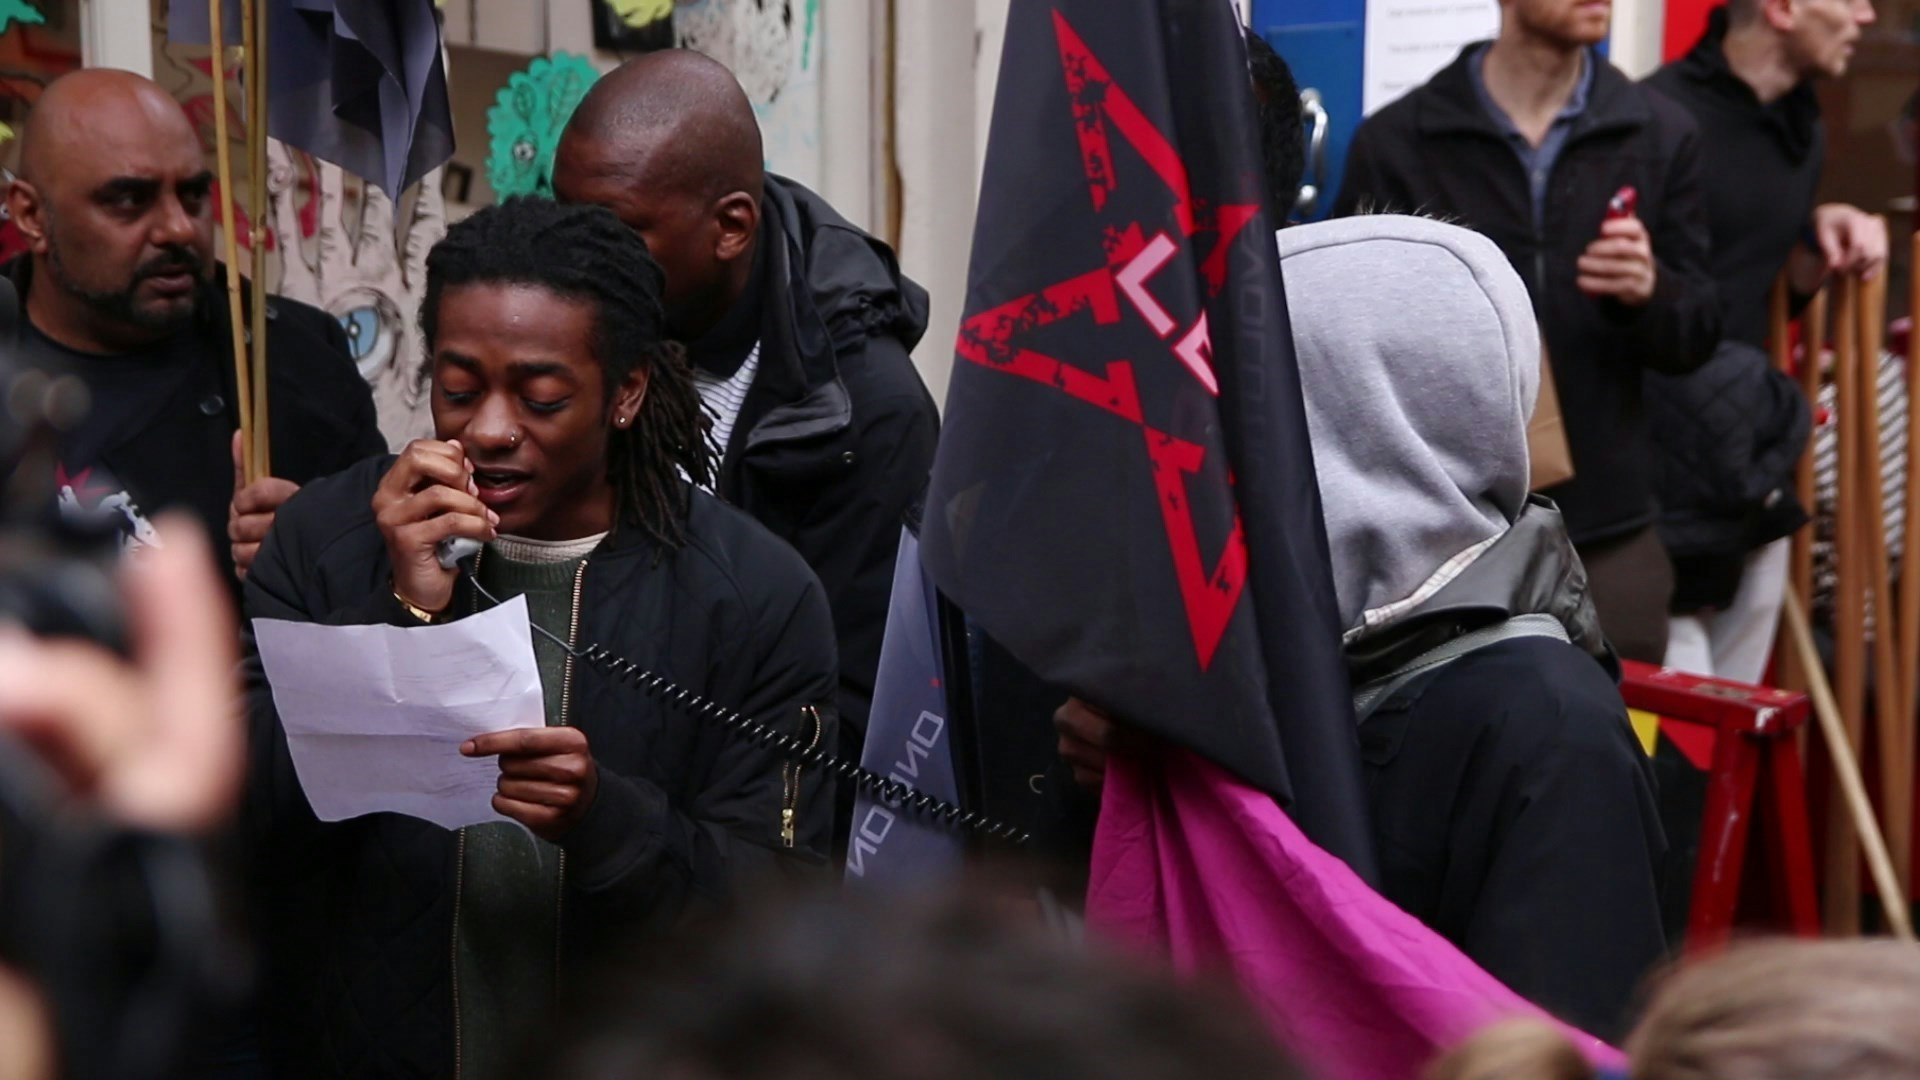 The new faces of black radical activism in the United Kingdom